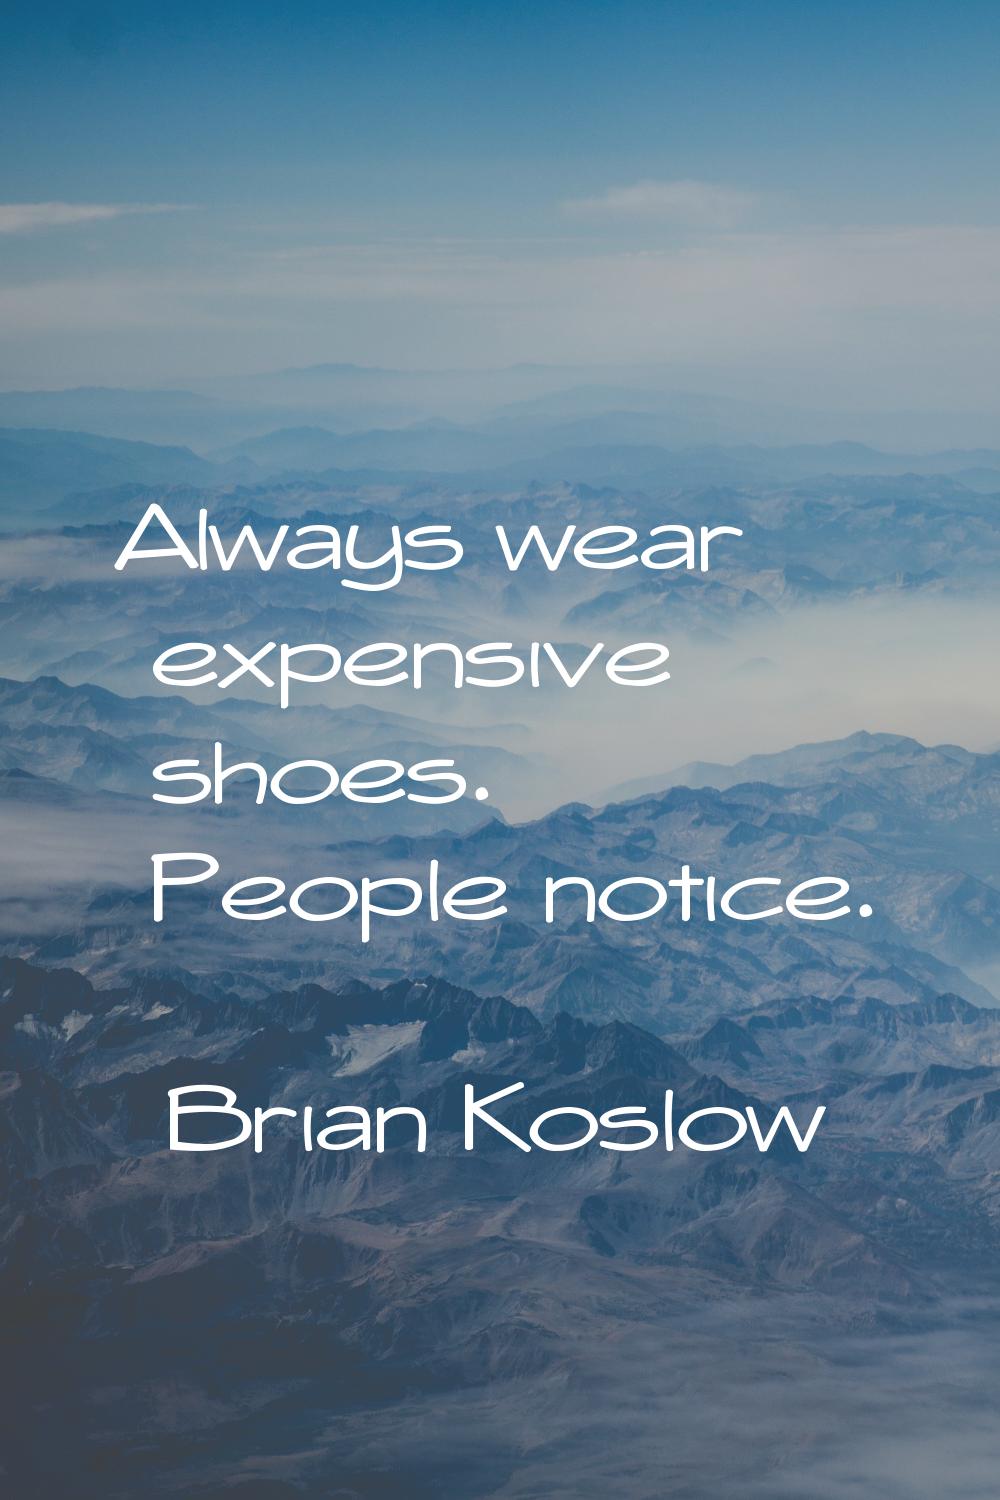 Always wear expensive shoes. People notice.